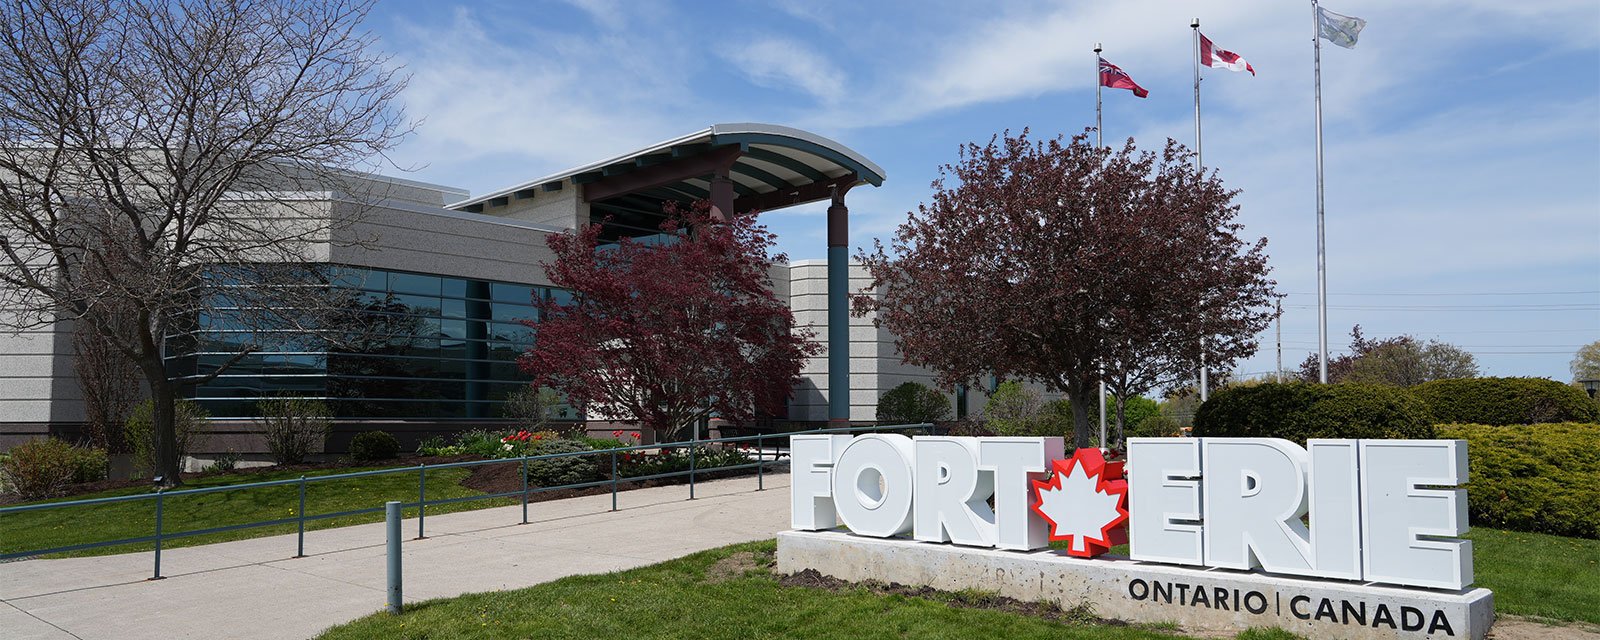 Fort Erie Town Hall and Iconic Fort Erie Sign